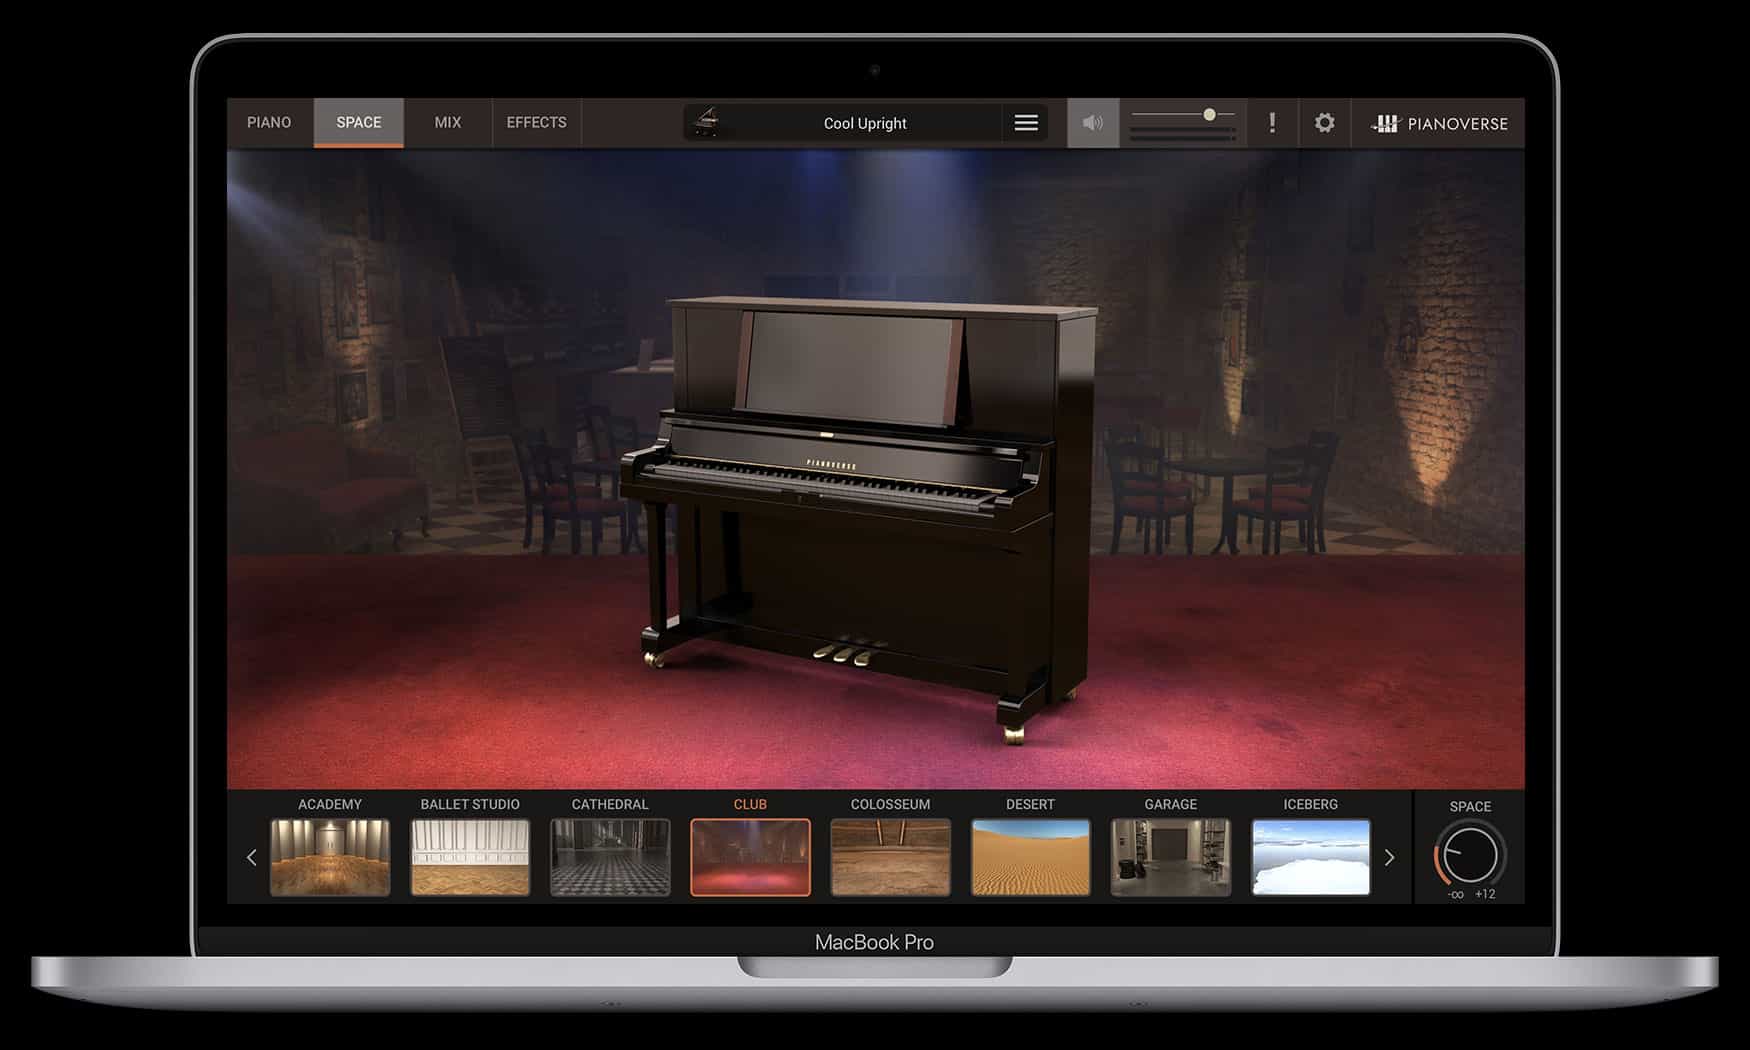 Macbook with Pianoverse GUI